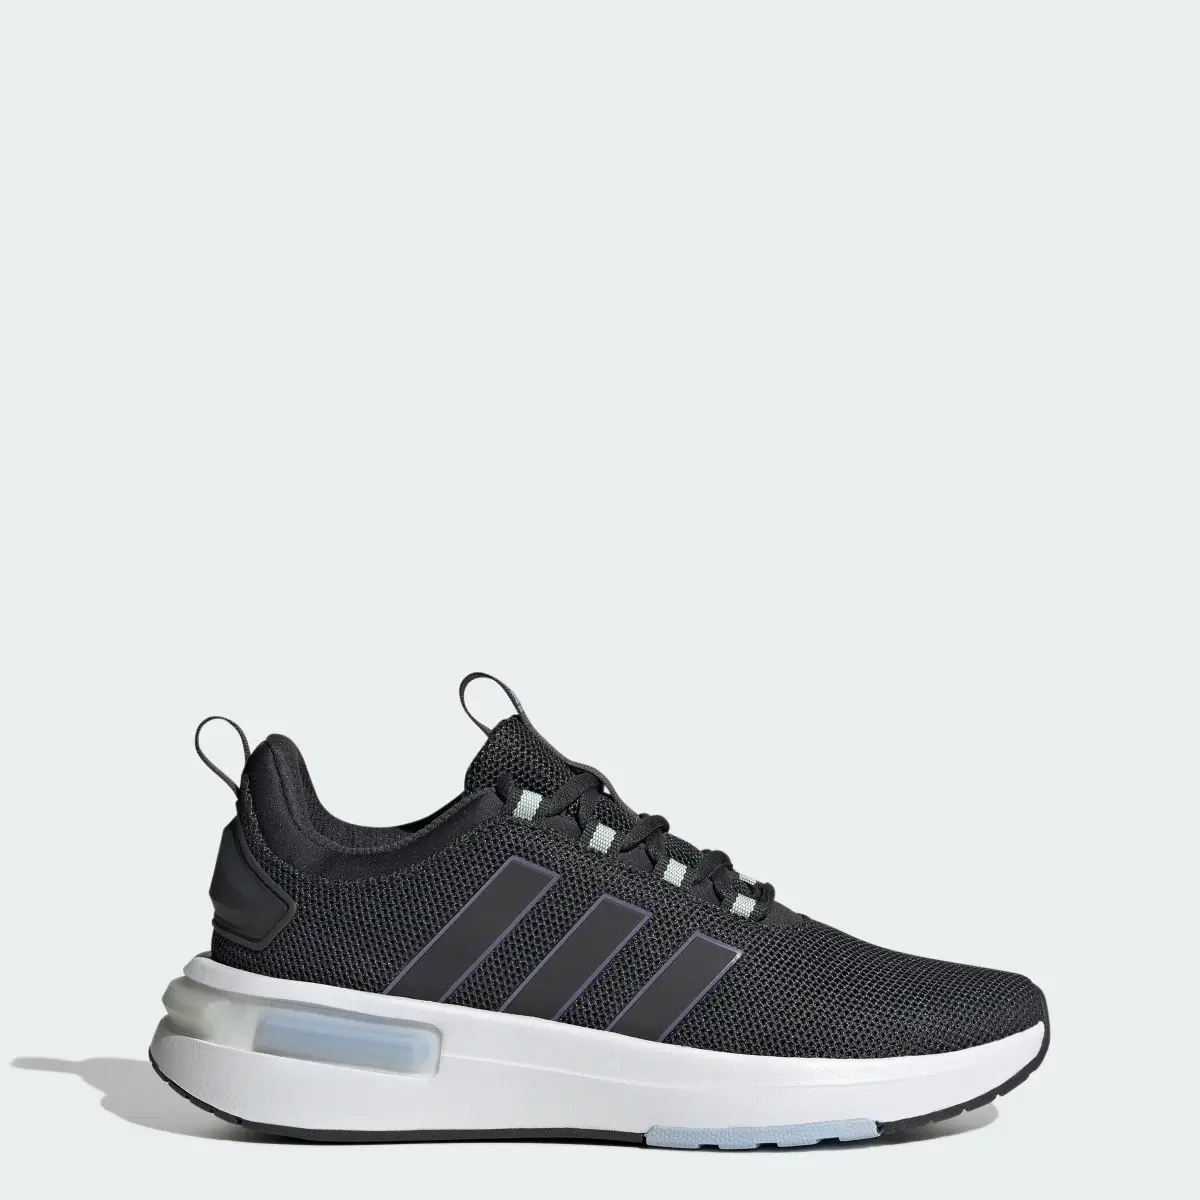 Adidas Racer TR23 Shoes. 1